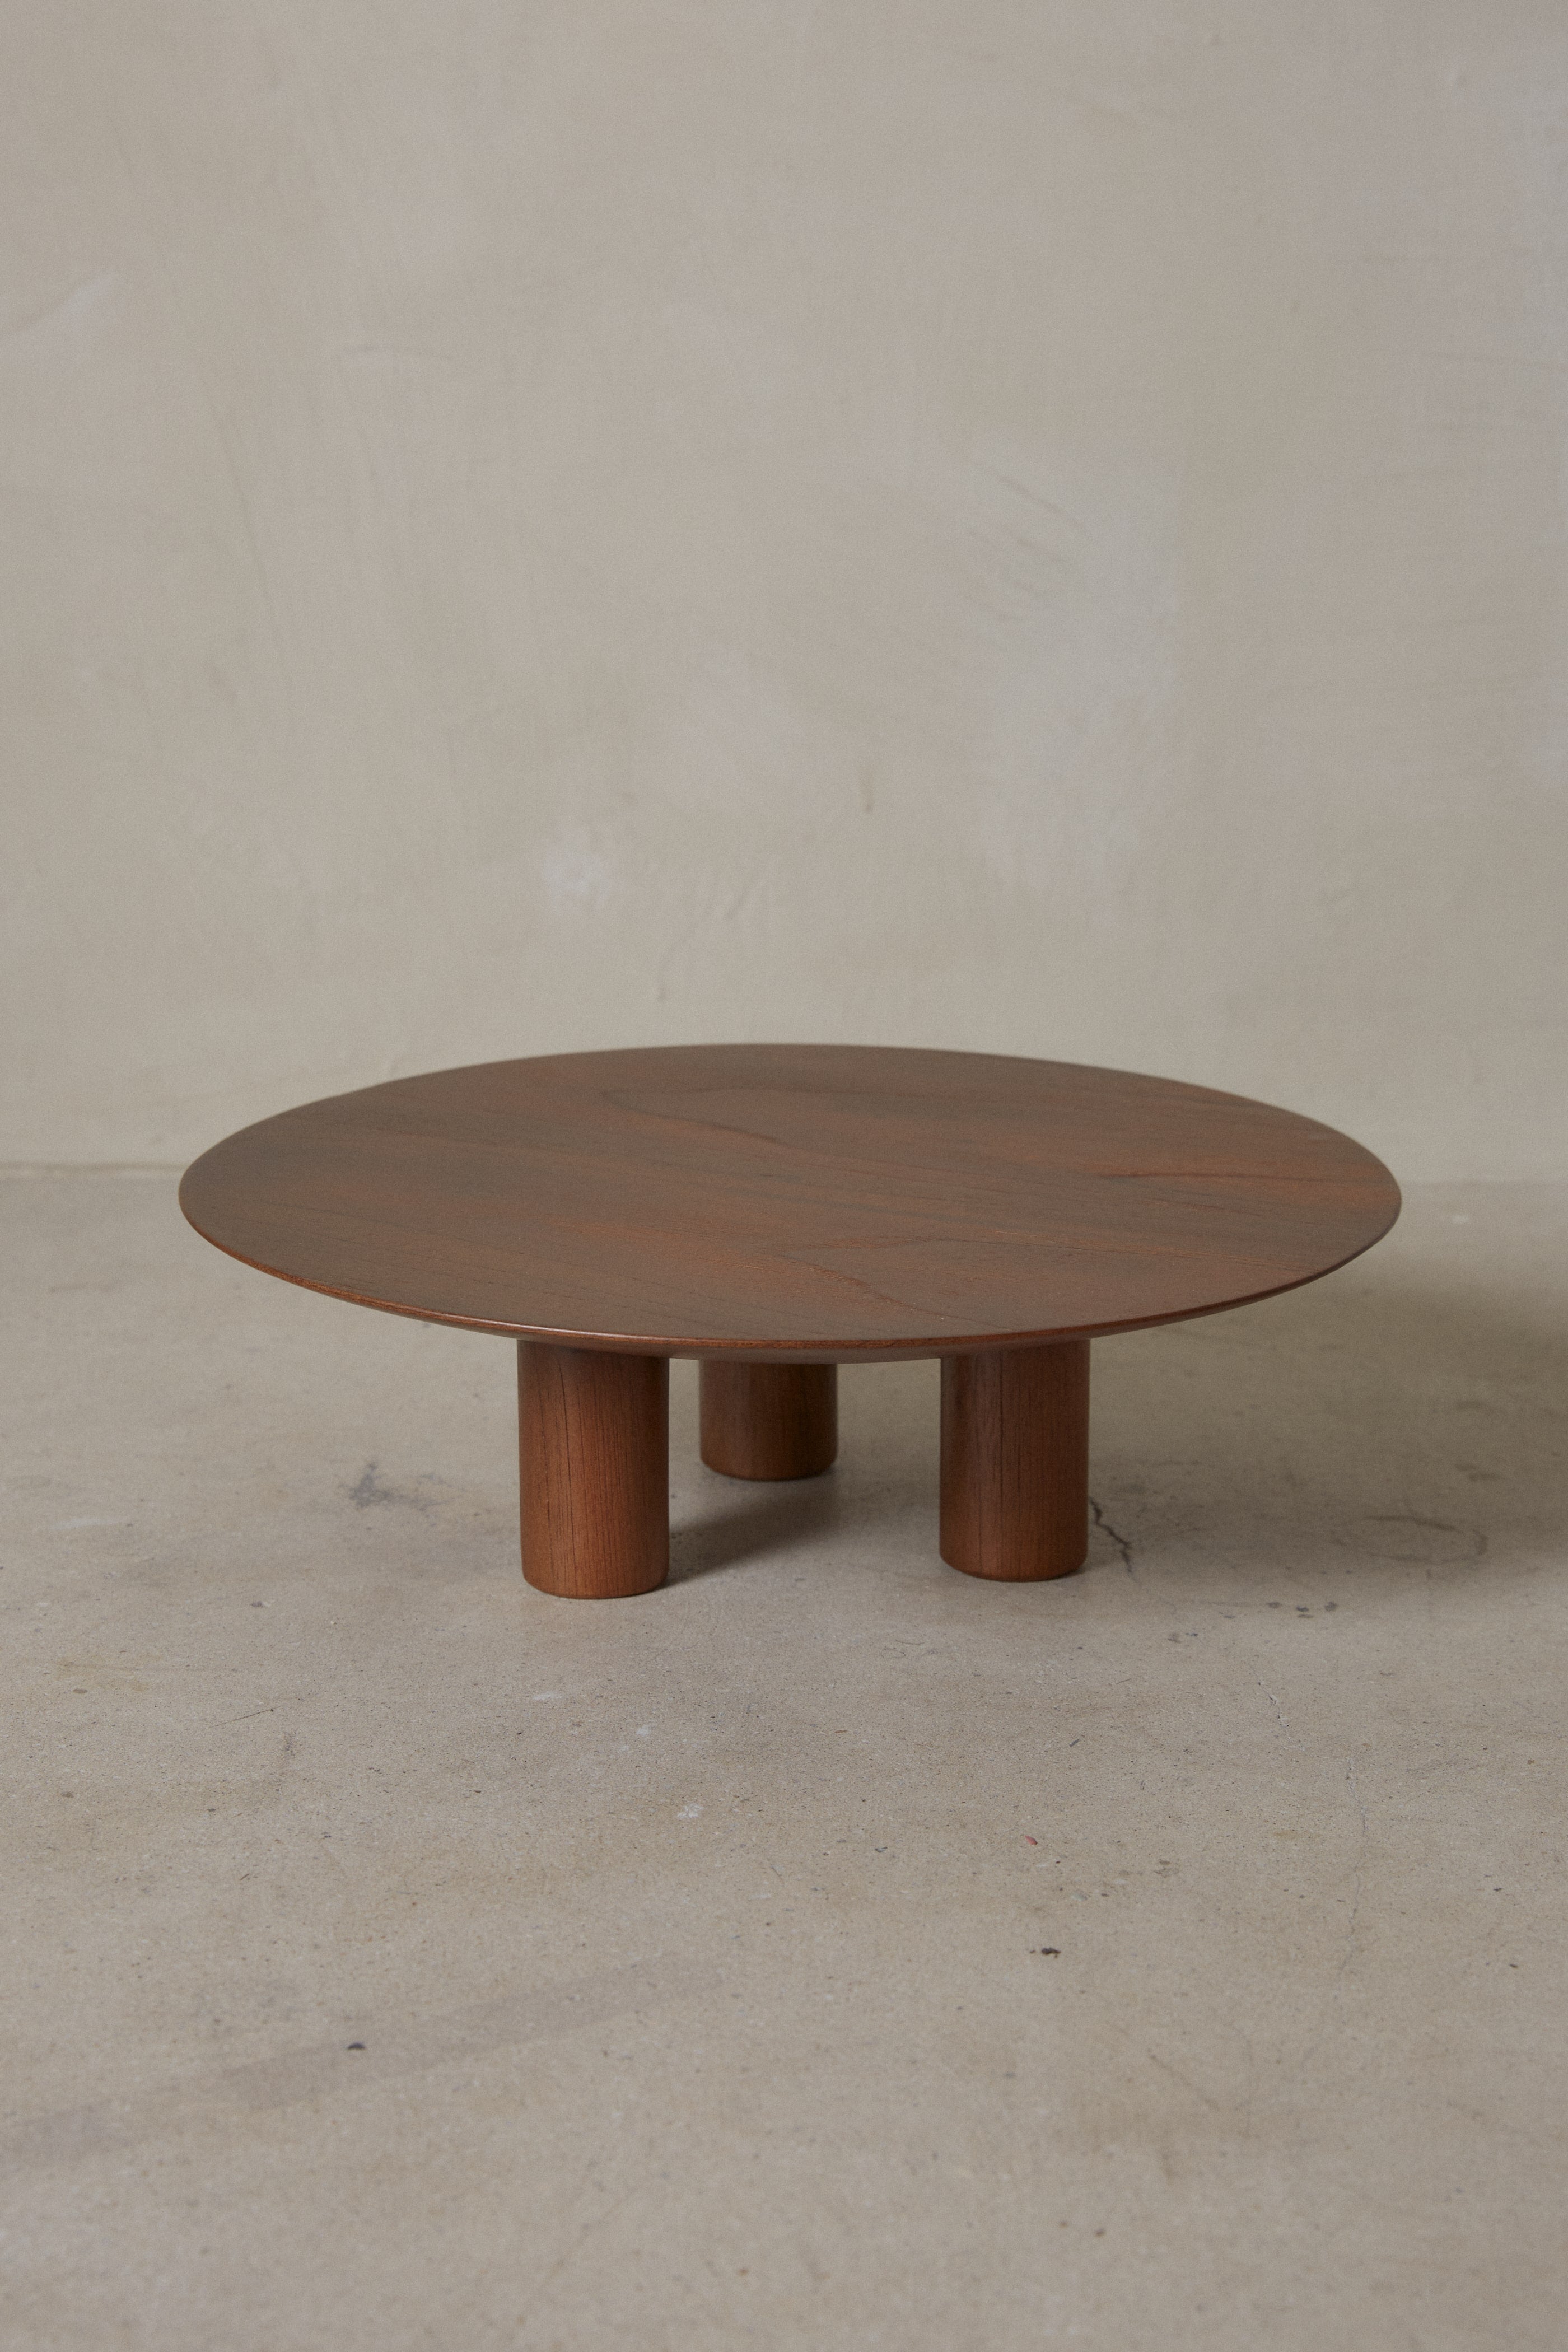  Modern and minimal round serving platter with three supporting legs and the markings of nature in deep, rich brown wood. 